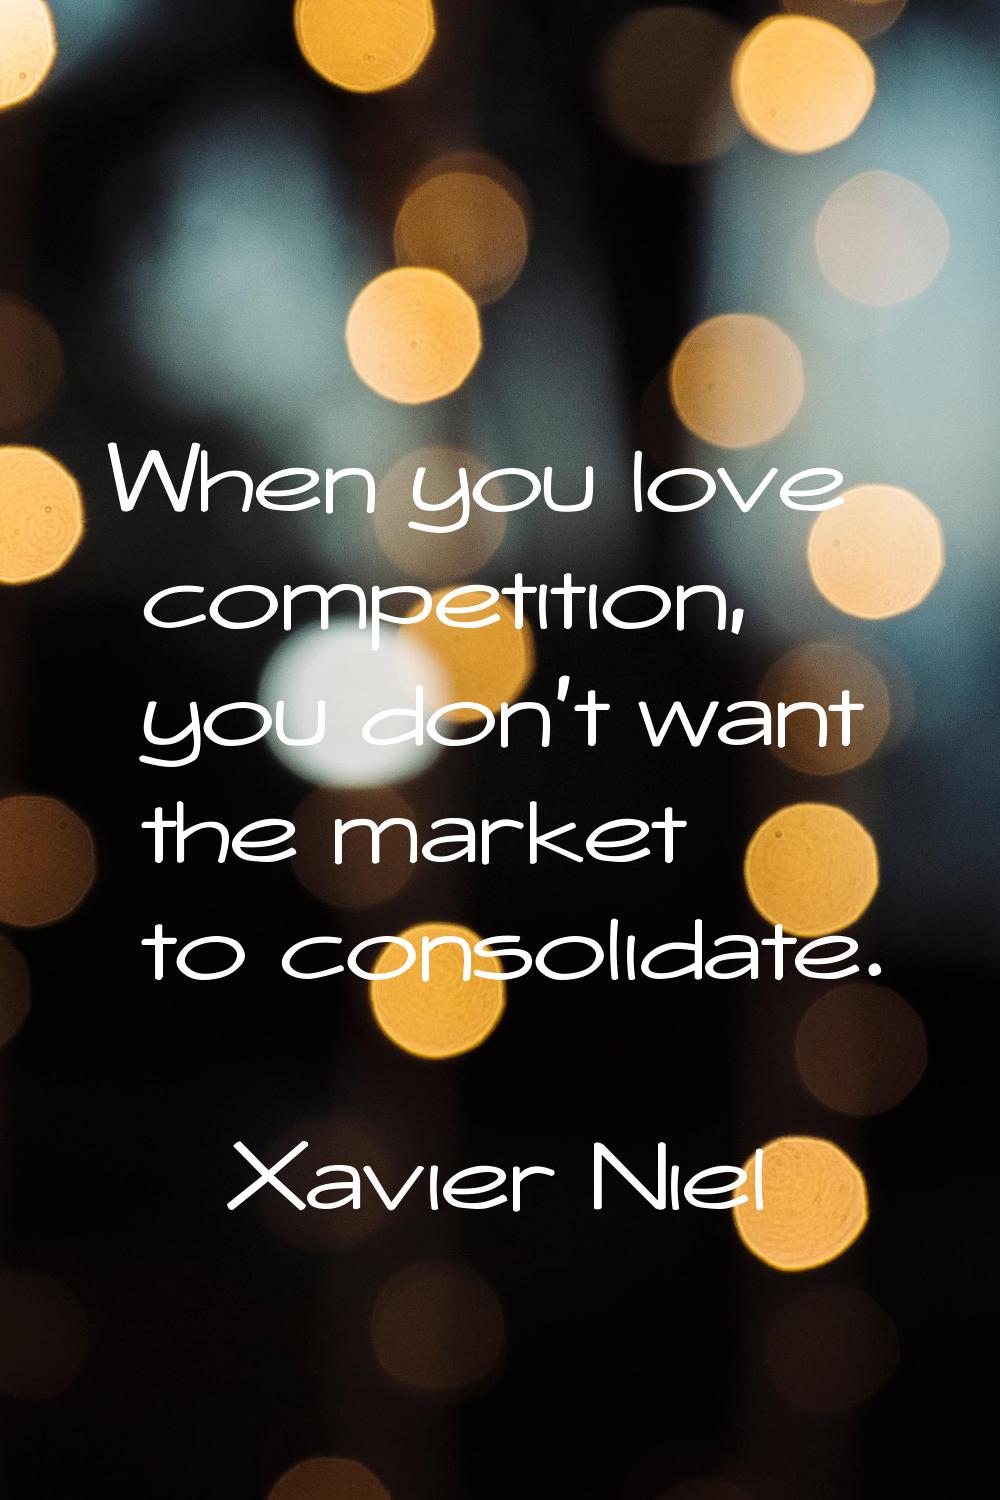 When you love competition, you don't want the market to consolidate.